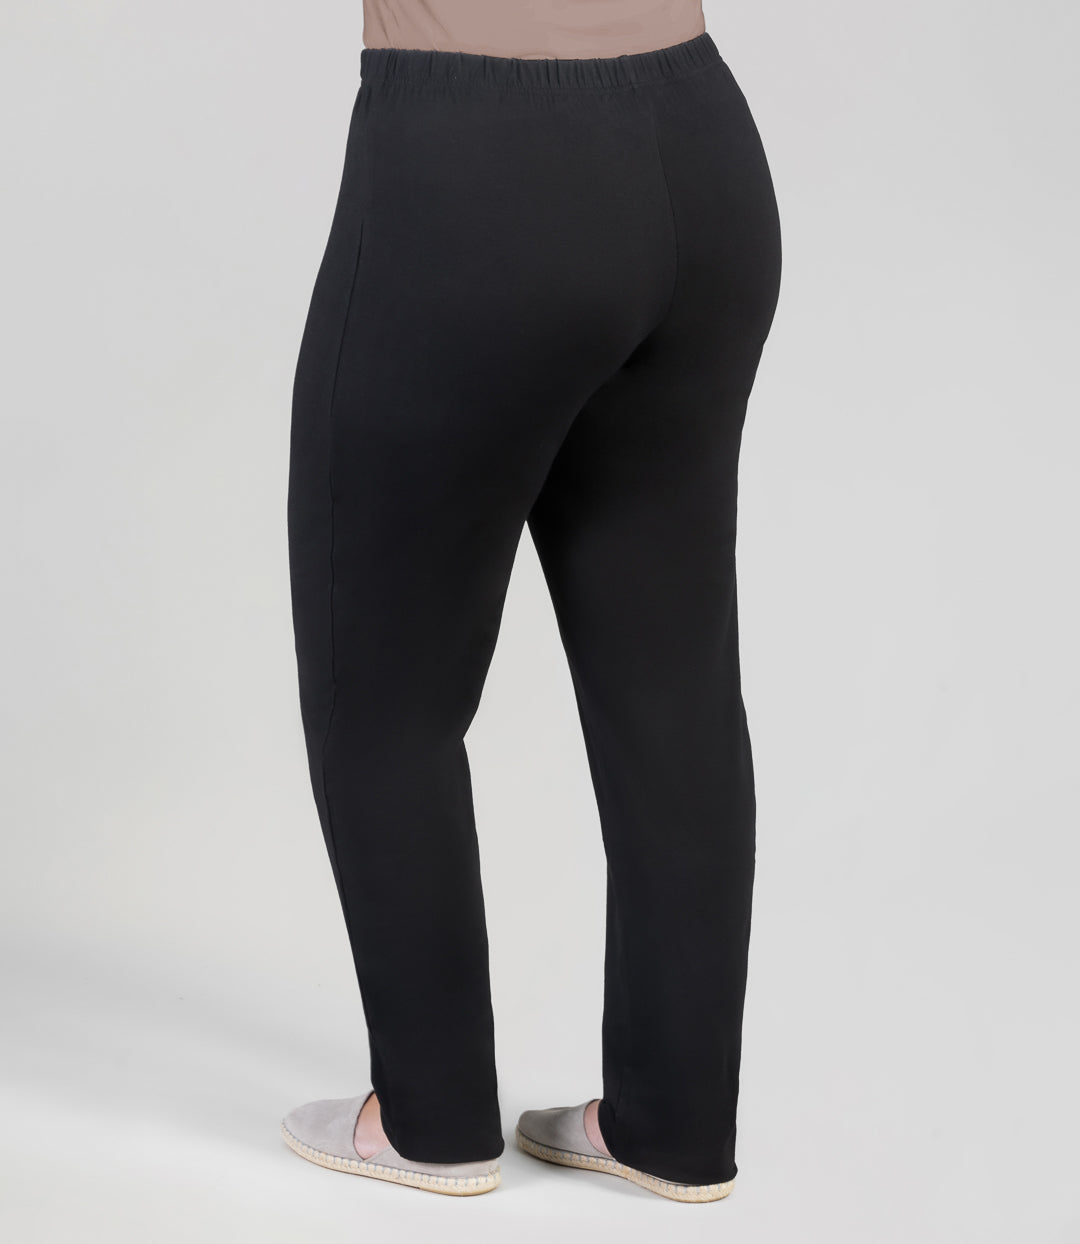 Alo Yoga's Top-Rated Leggings Are 40% Off (!!) Right Now